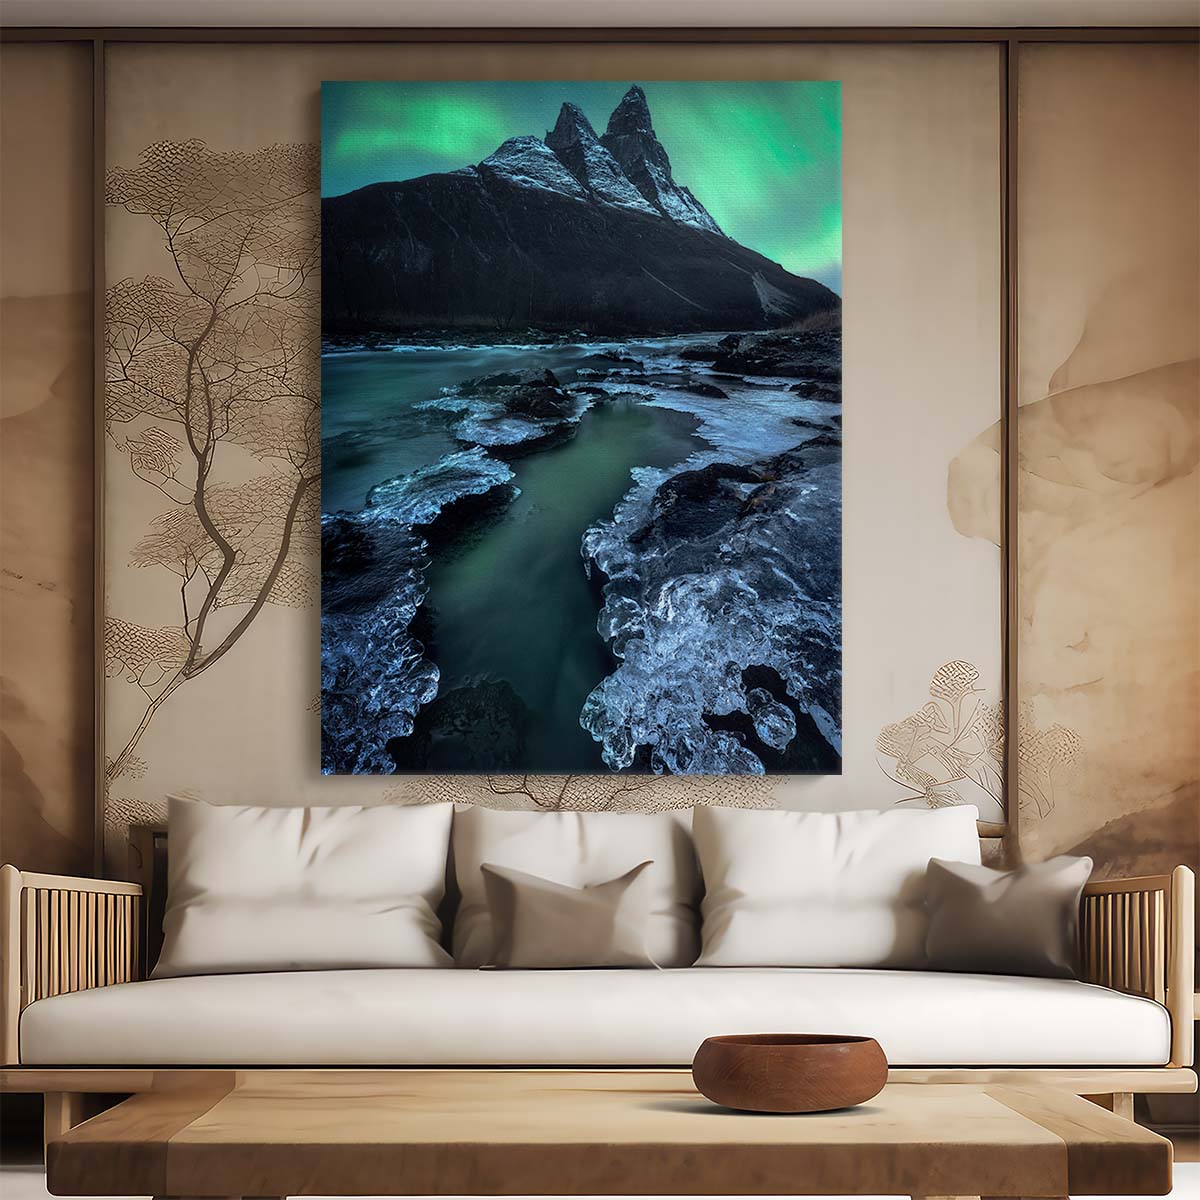 Aurora Borealis Night Sky Starry Mountain Photography Art by Luxuriance Designs, made in USA